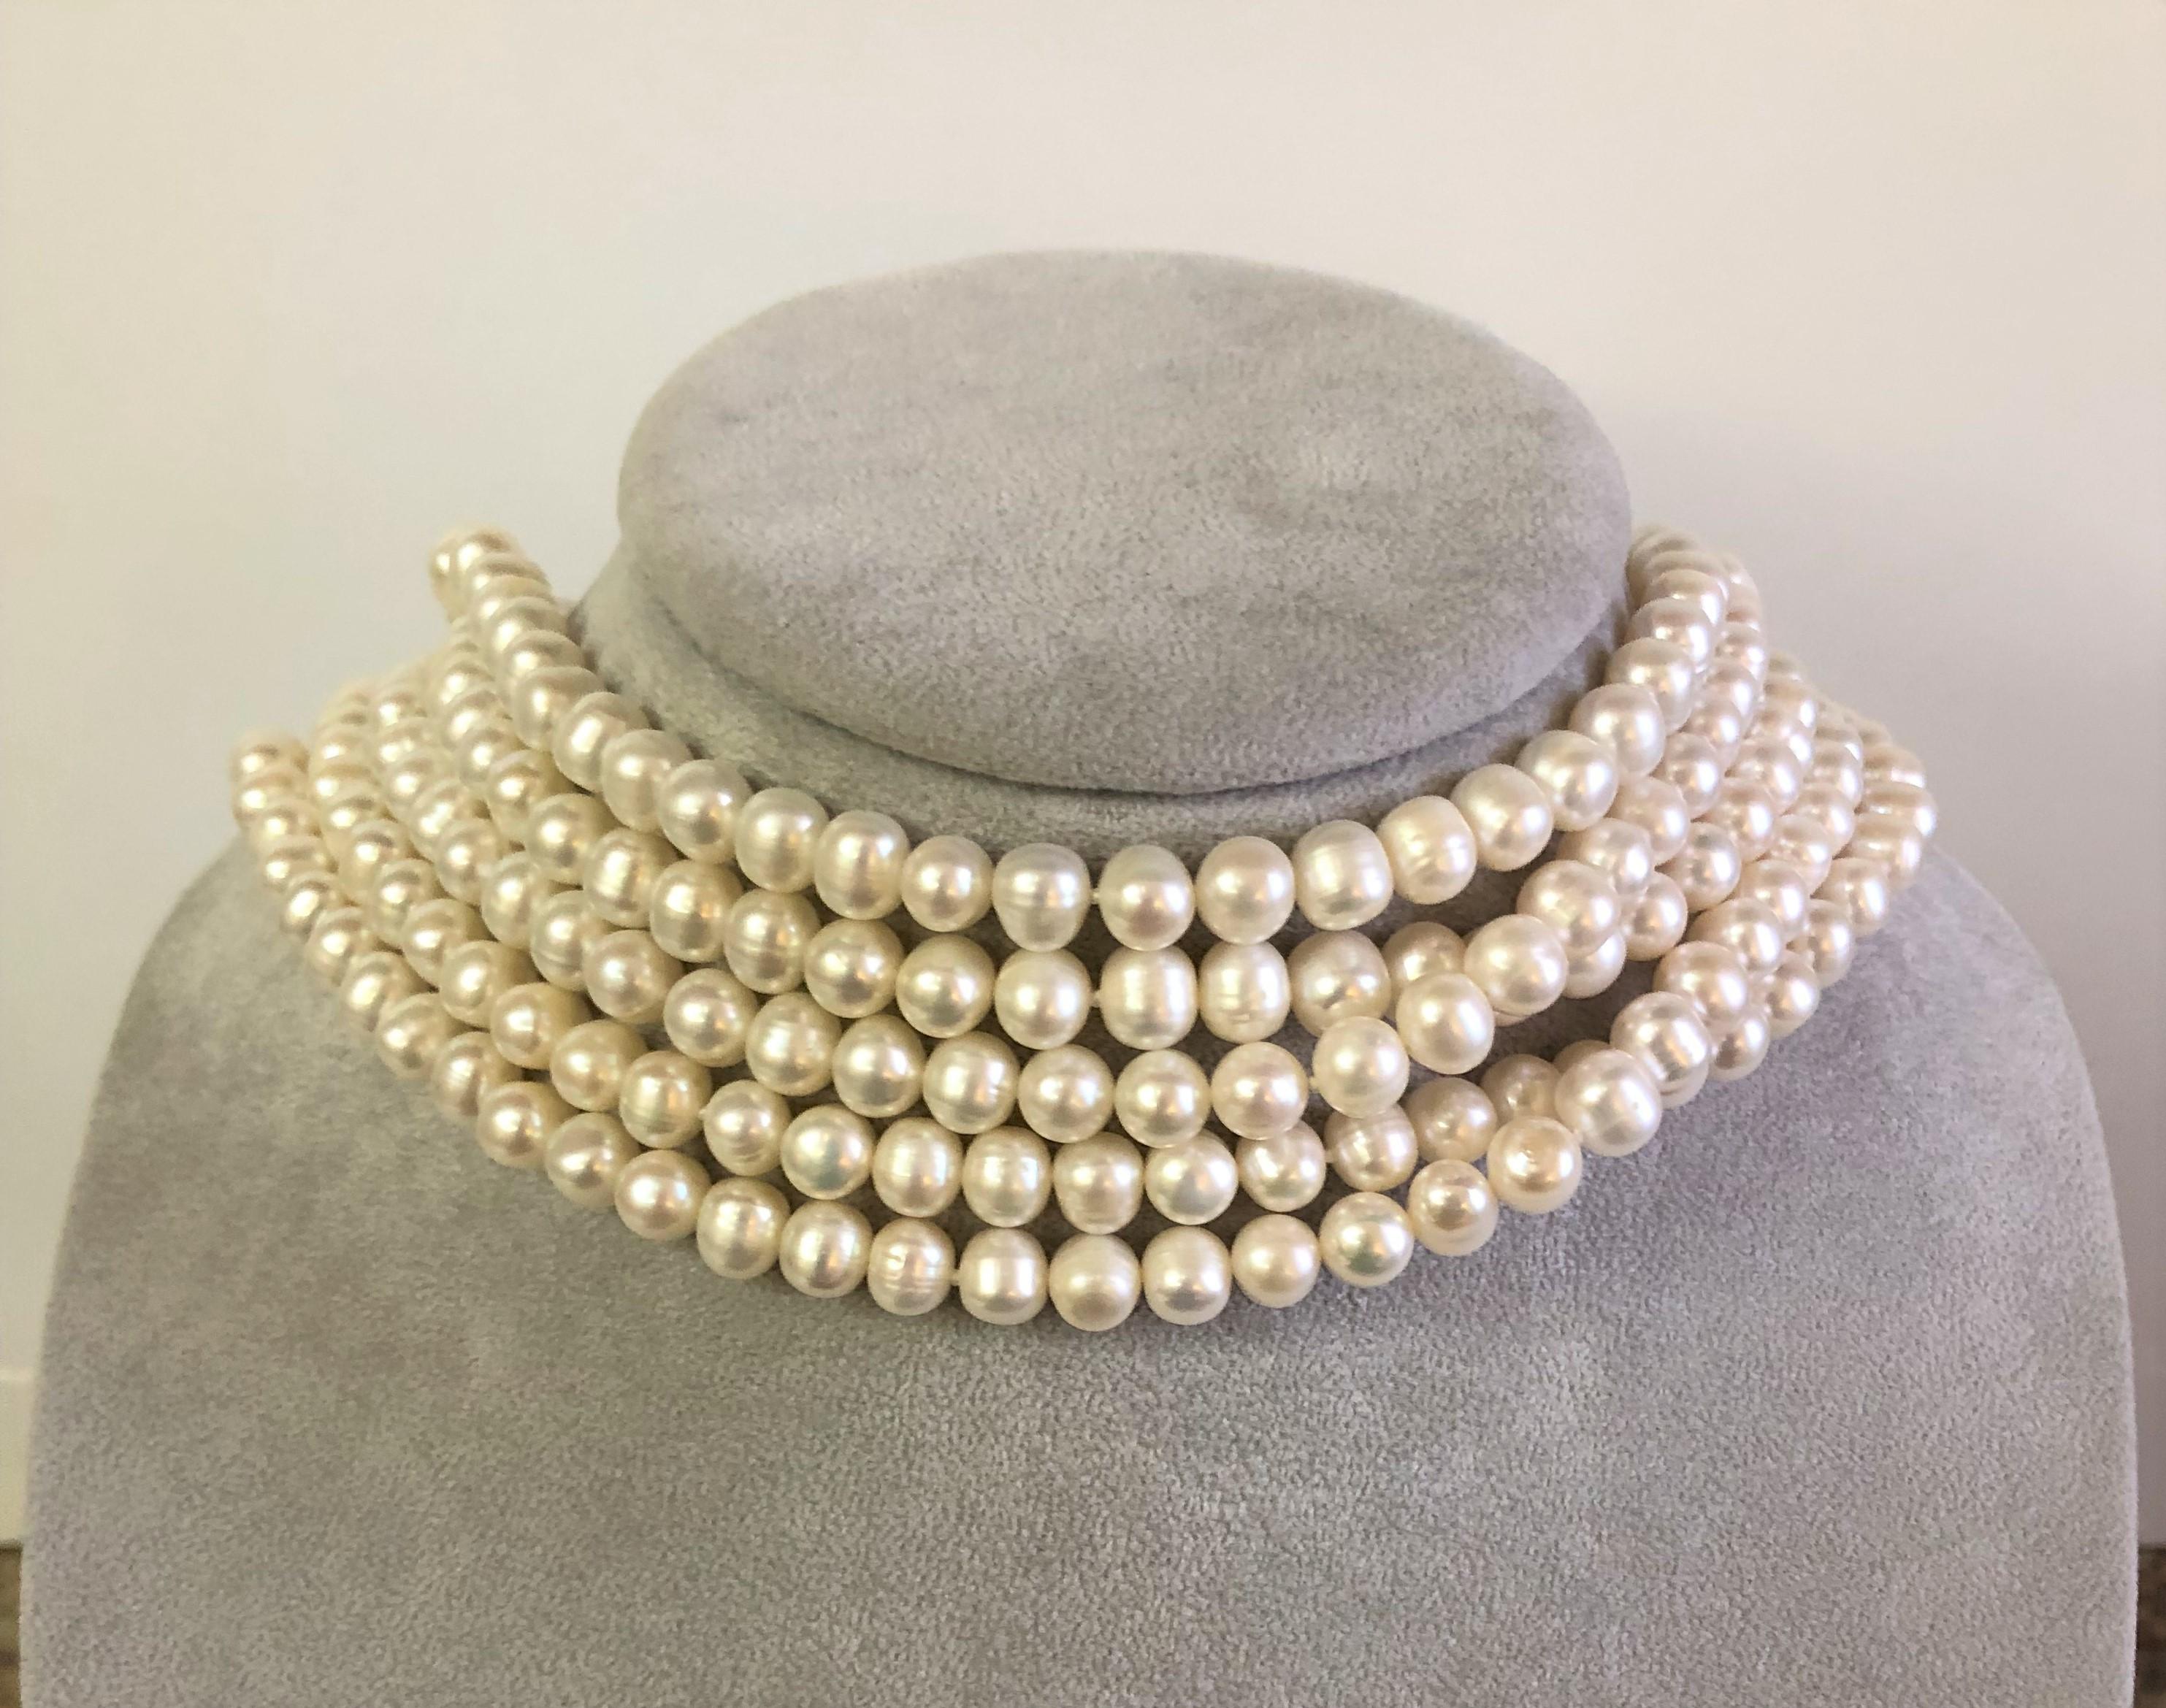 This pearl necklace can be worn so many different ways, very versatile!  
100 inches, no clasp.
Off-round warm white colored pearls with high luster.
Recently restrung.  